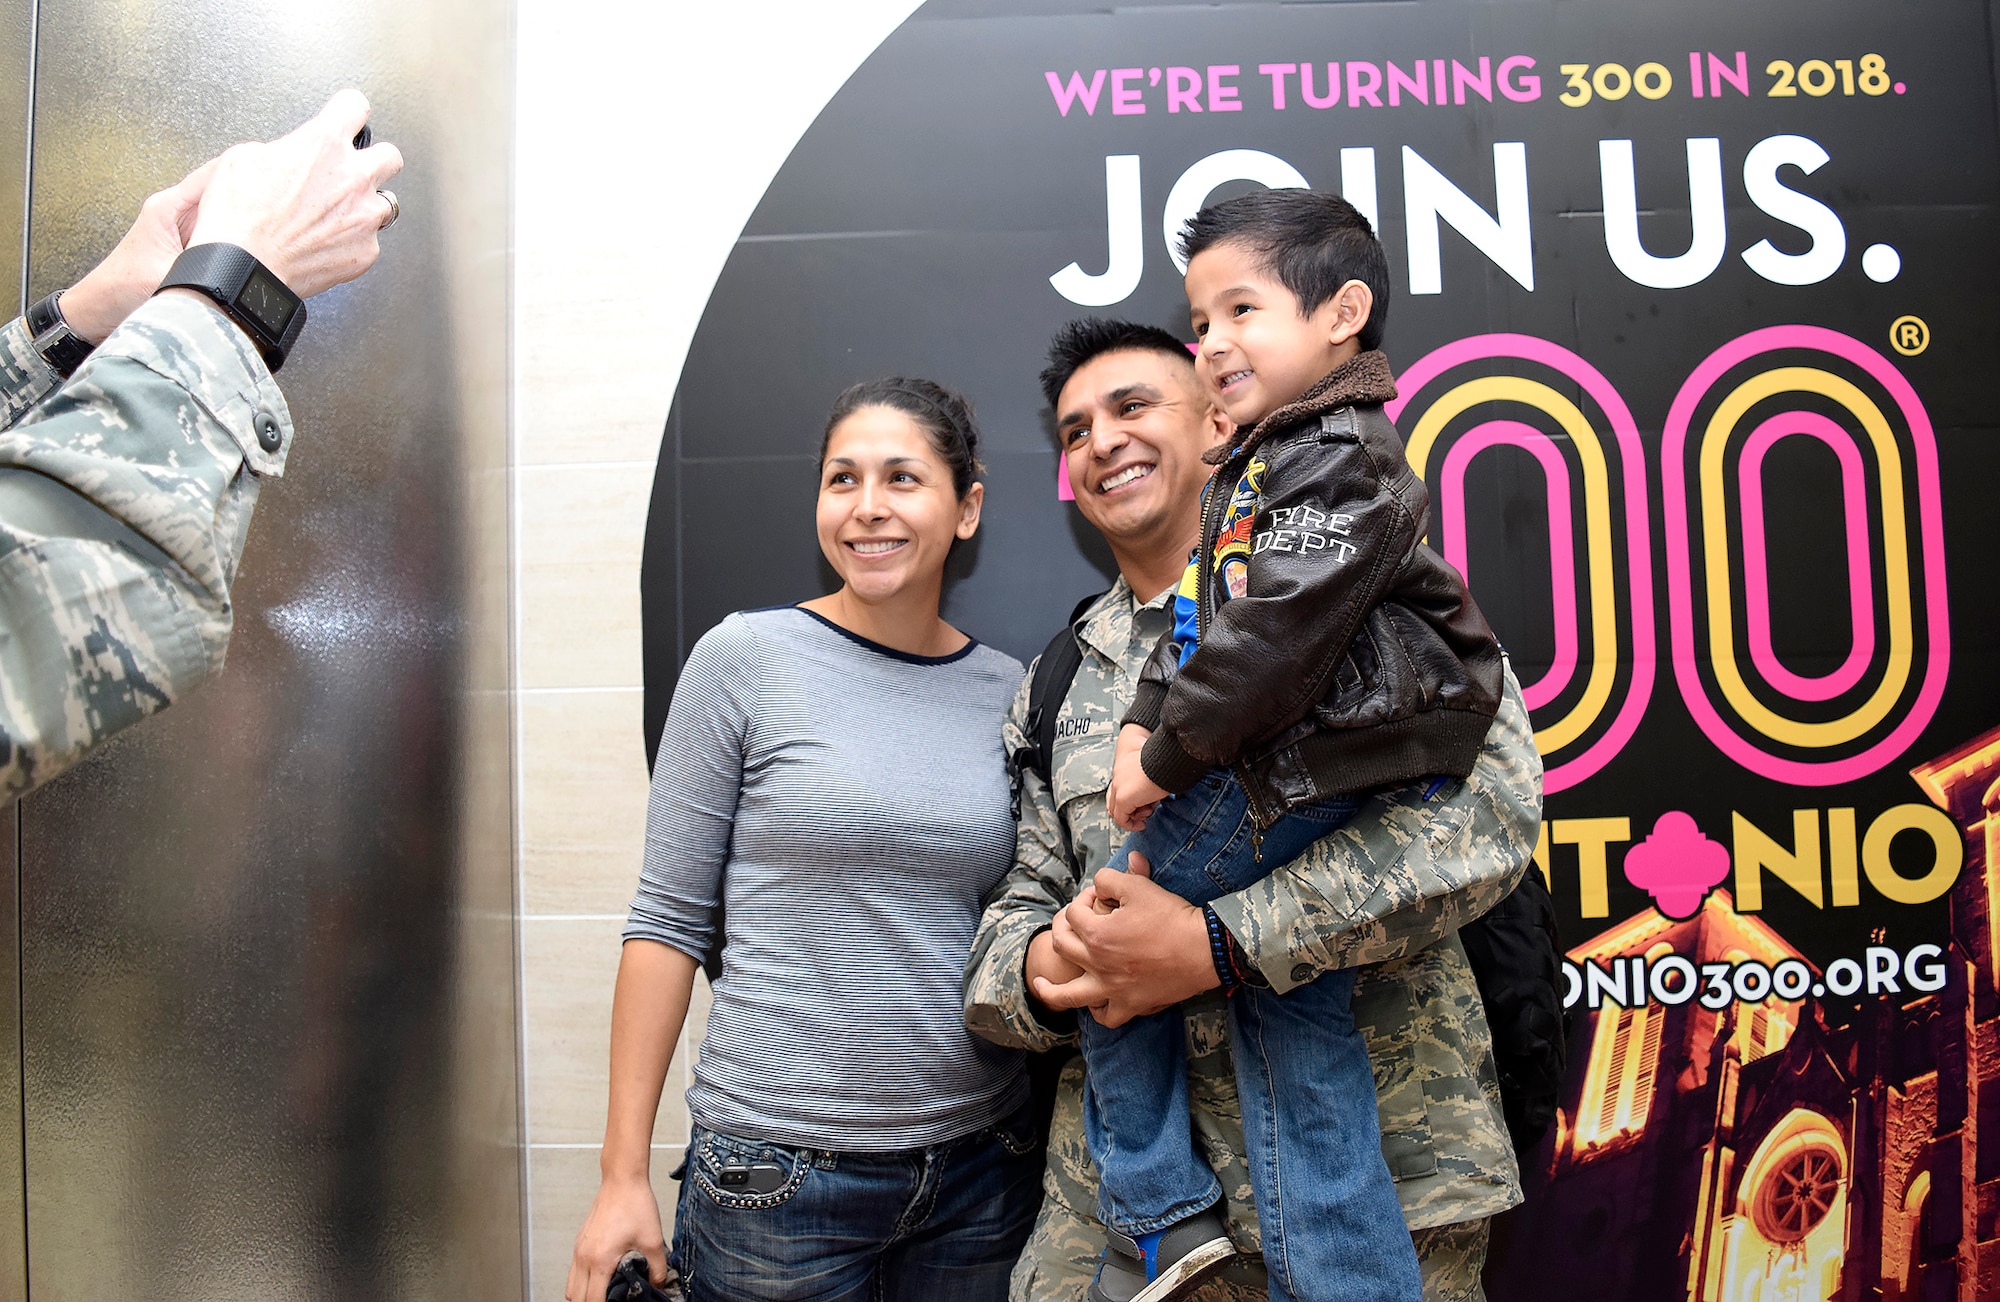 Master Sgt. Manuel Camacho, Jr., 433rd Security Forces Squadron, takes a moment with his son Adrian and SMSgt. Elena Ramirez, 433rd Aerospace Medicine Squadron upon his return Jan. 19, 2017 at the San Antonio International Airport, Texas. Thirteen Citizen Airmen returned from a six-month deployment to Southwest Asia in support of Operation Inherent Resolve. 